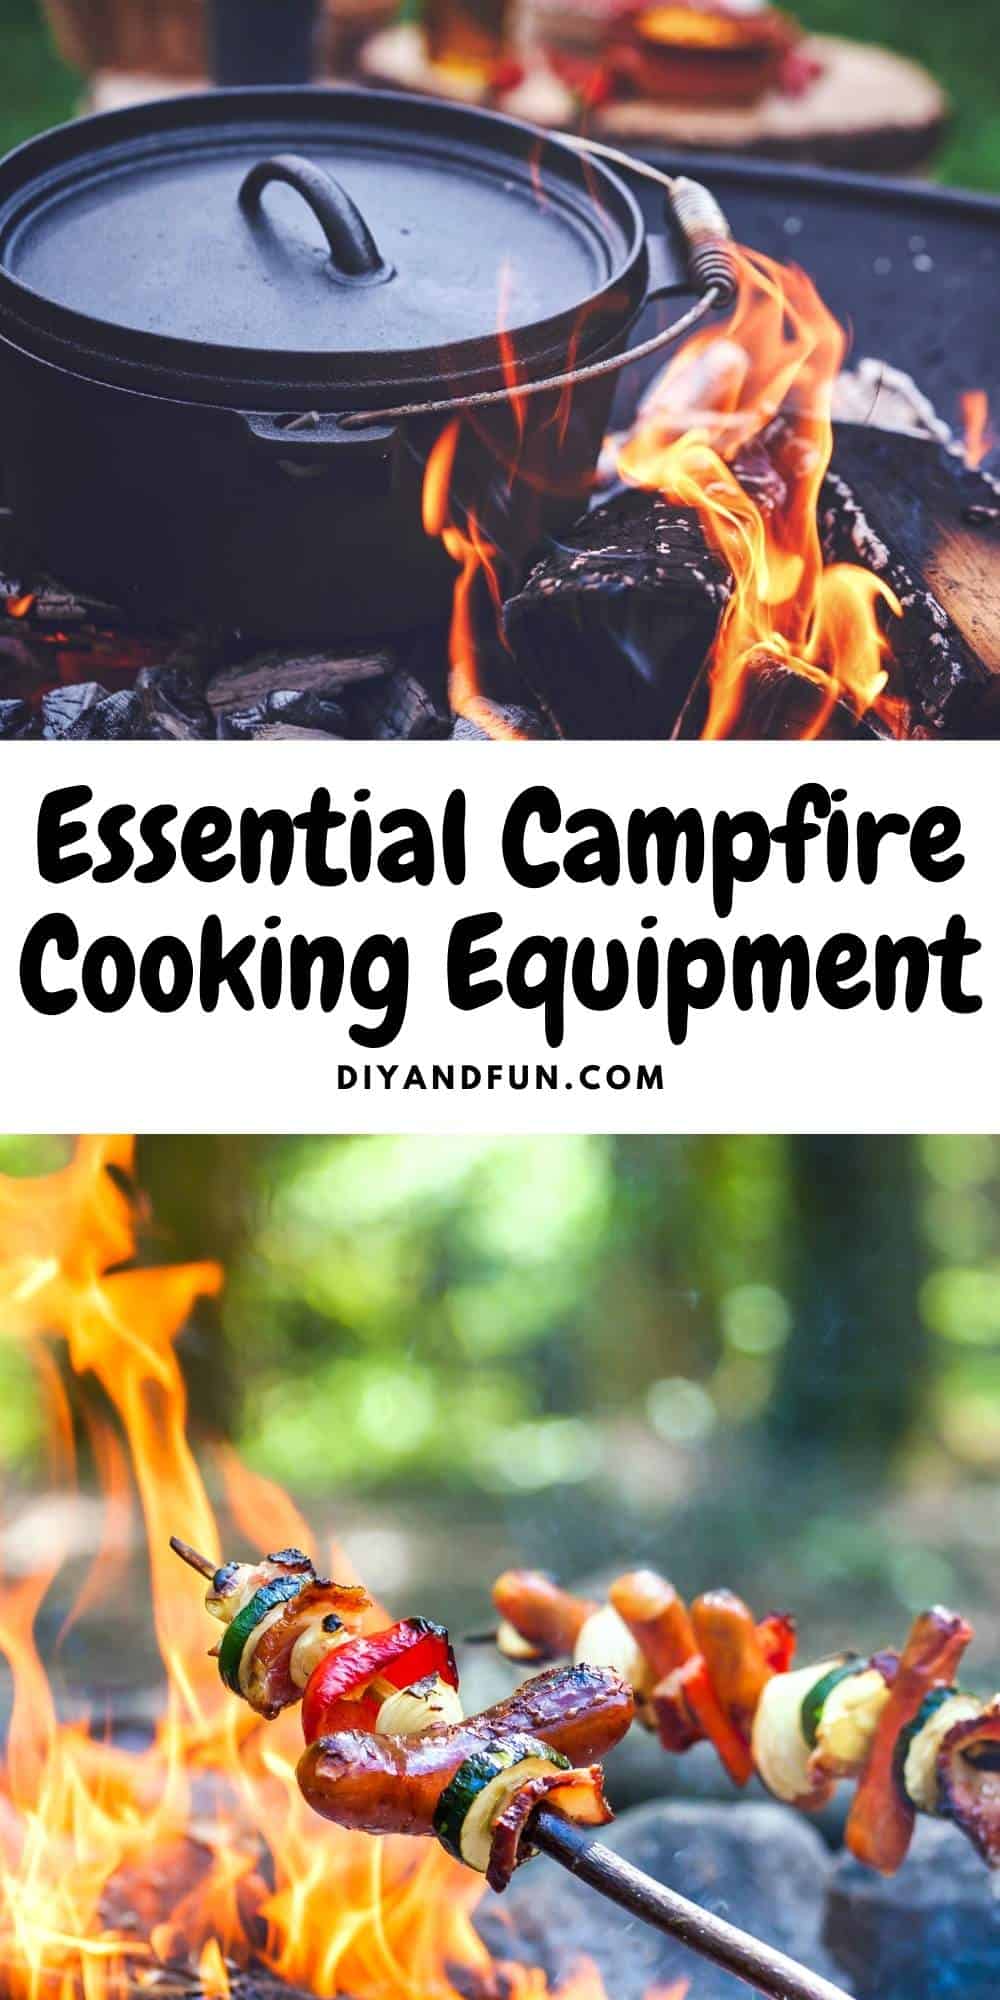 Essential Campfire Cooking Equipment, a basic guide for campers, what to pack for cooking and dining while on a camping trip.